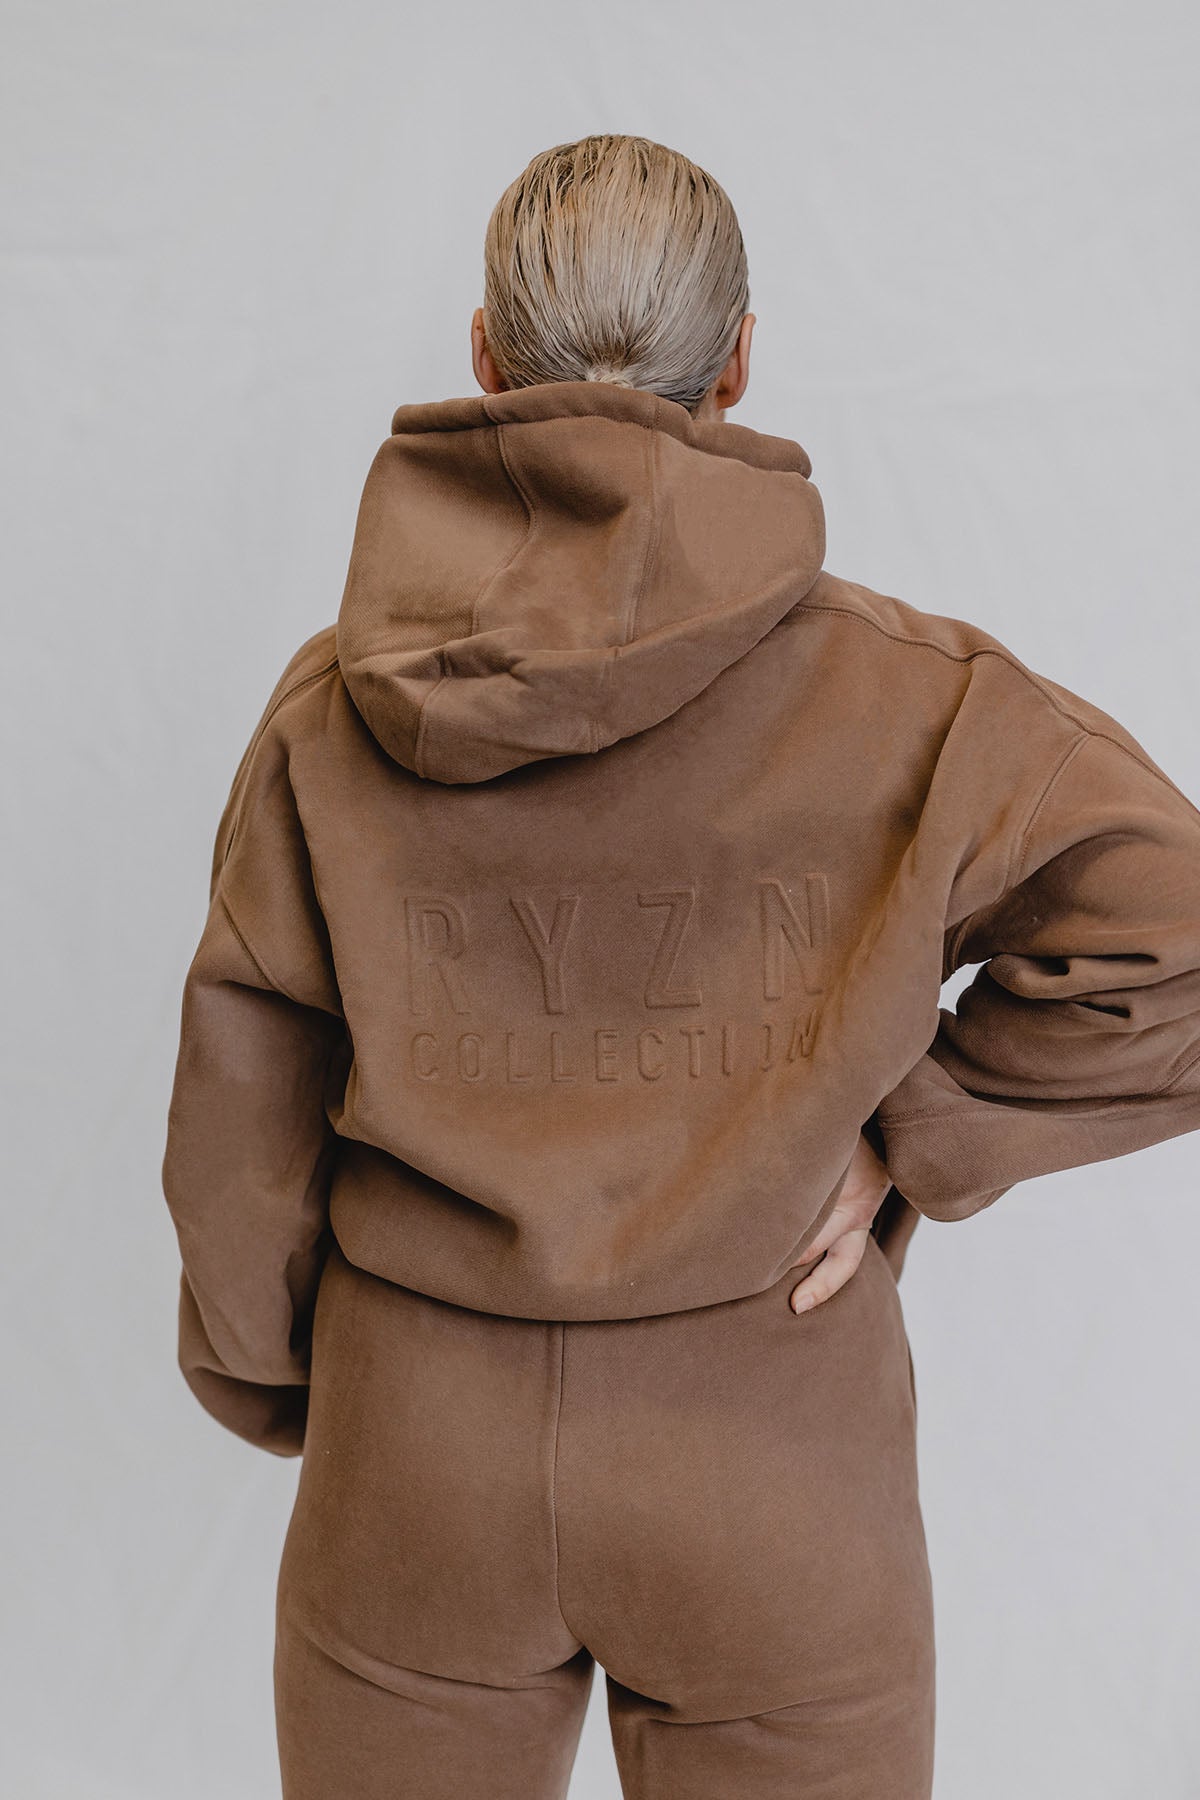 Embossed RYZN COLLECTION Hoodie - Chocolate